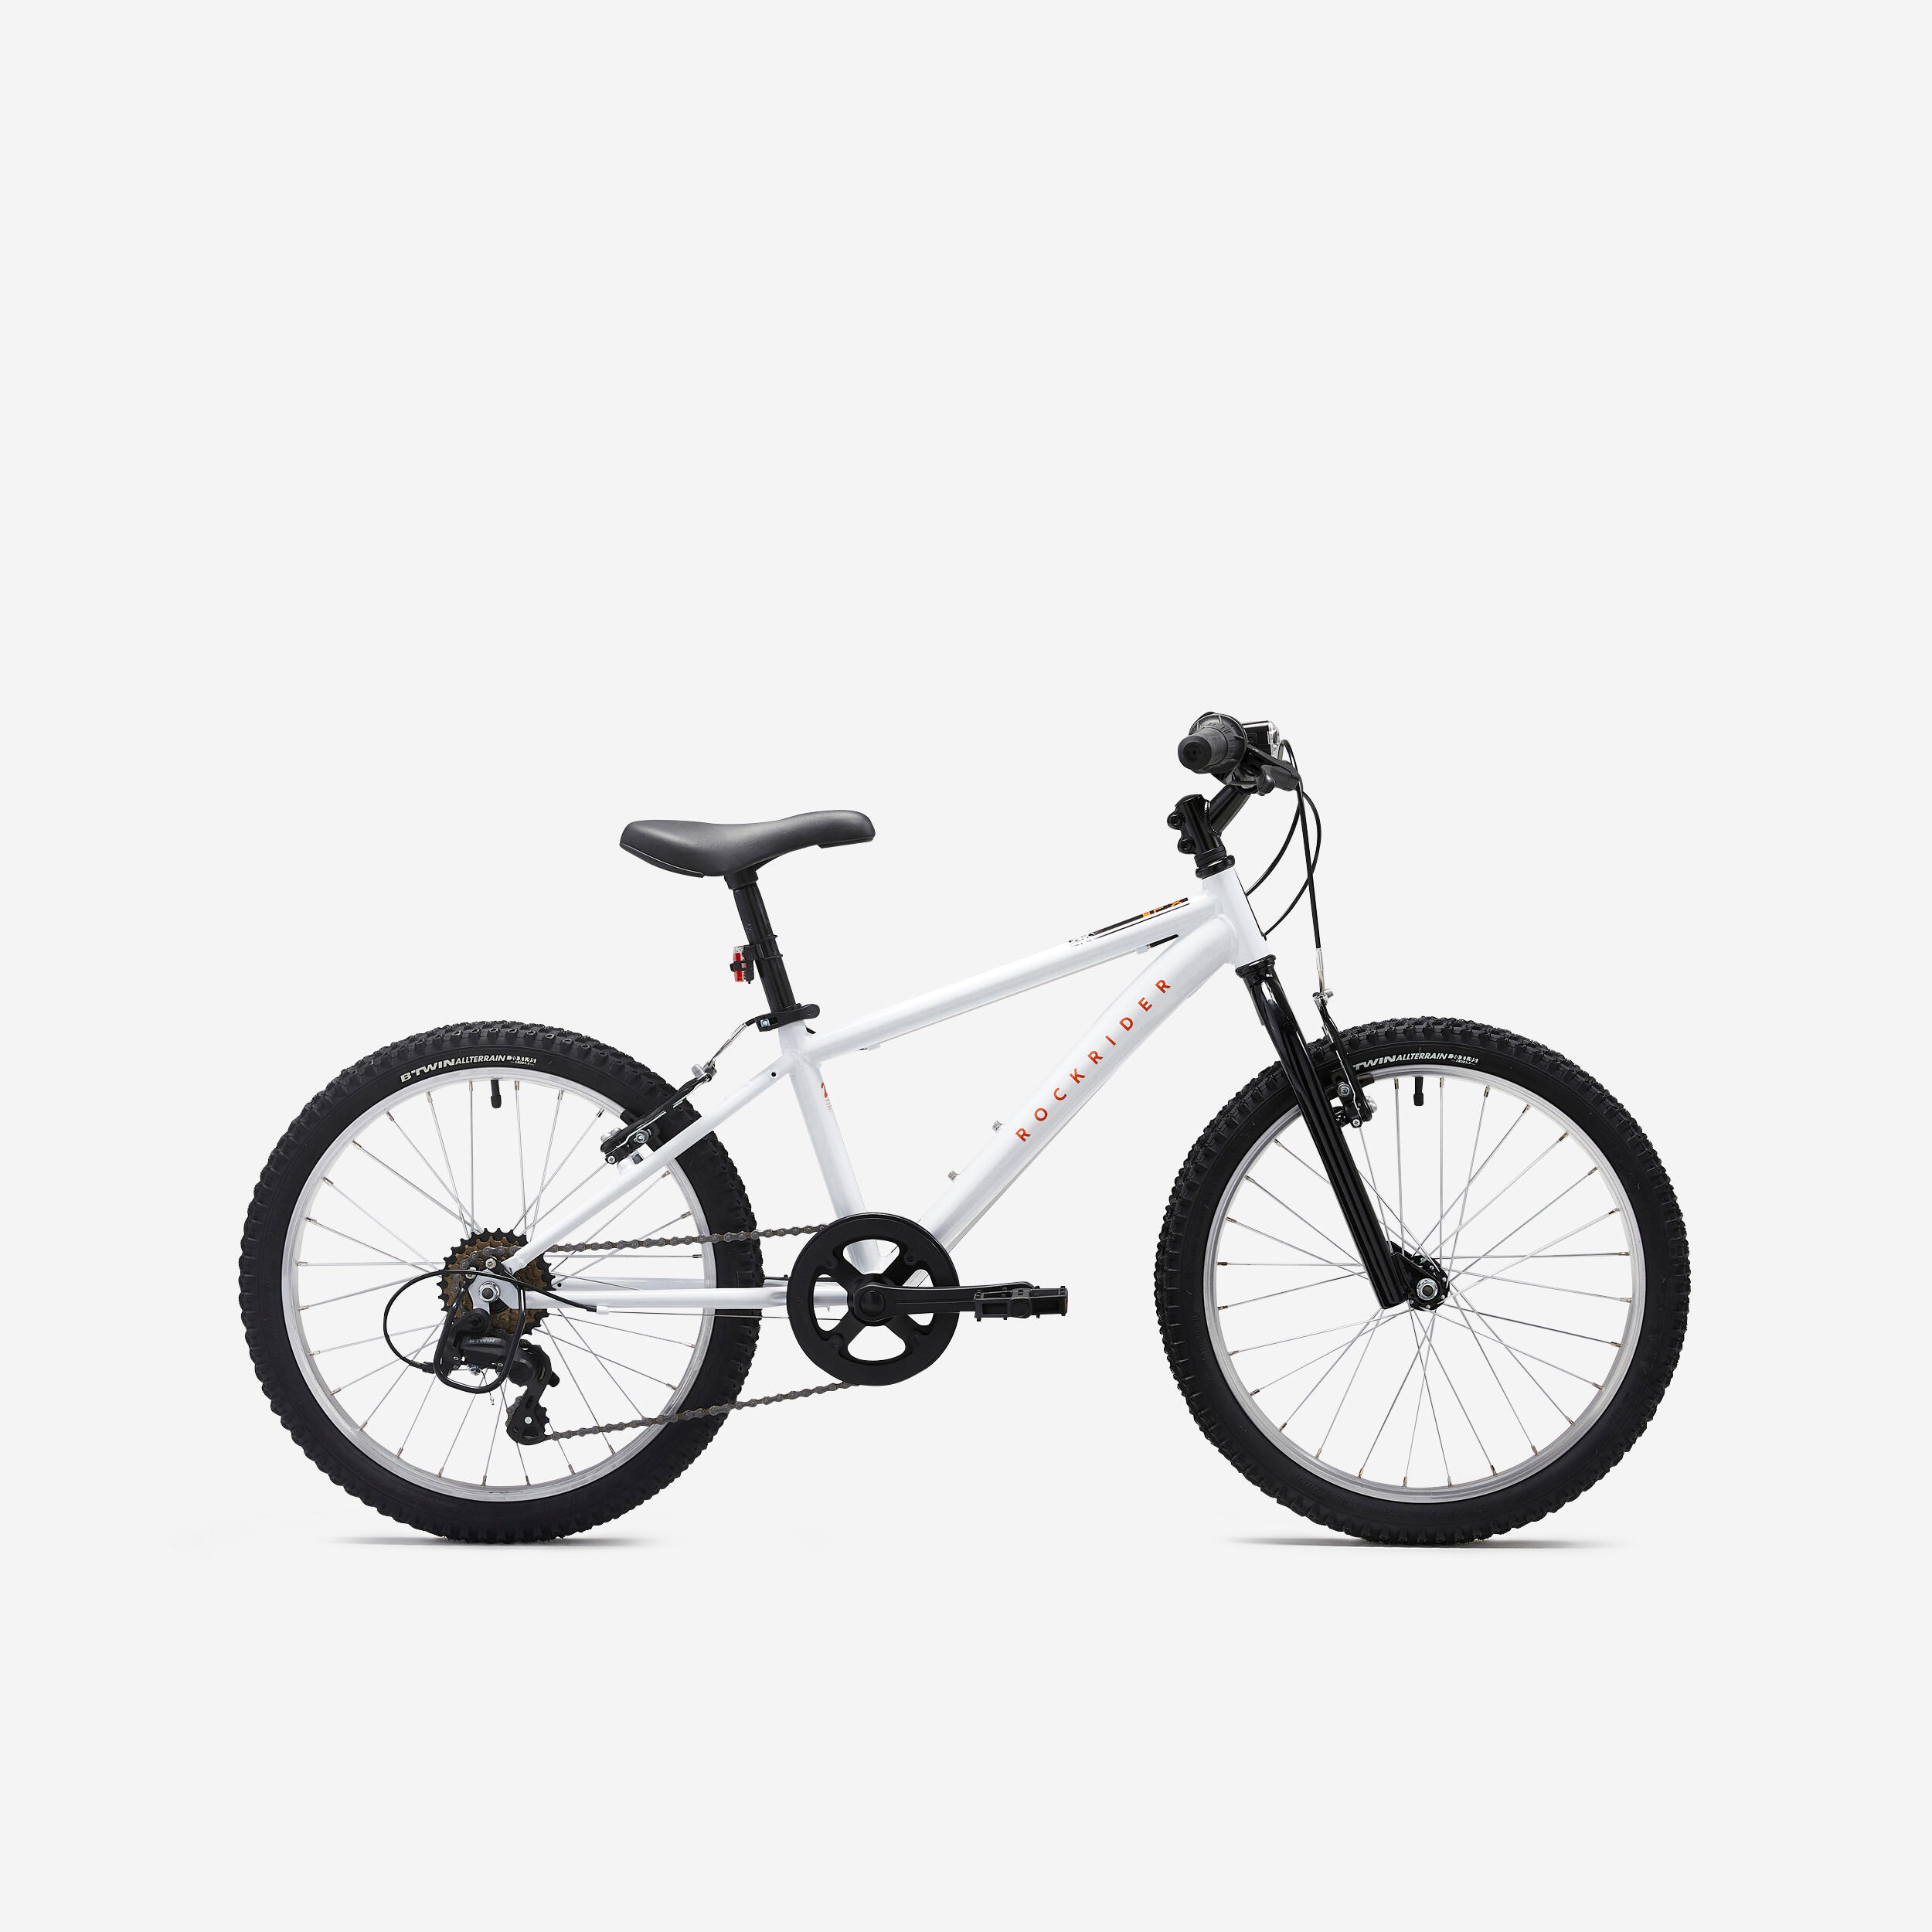 BTWIN Kids' 20-Inch Mountain Bike Explore 120 Ages 6-9 - White